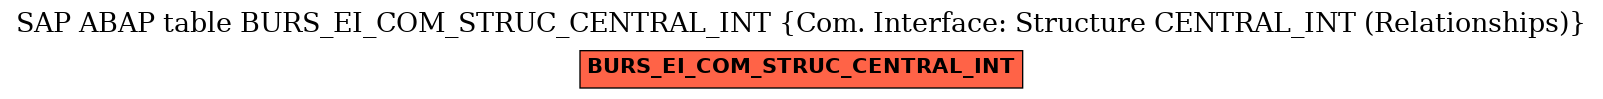 E-R Diagram for table BURS_EI_COM_STRUC_CENTRAL_INT (Com. Interface: Structure CENTRAL_INT (Relationships))